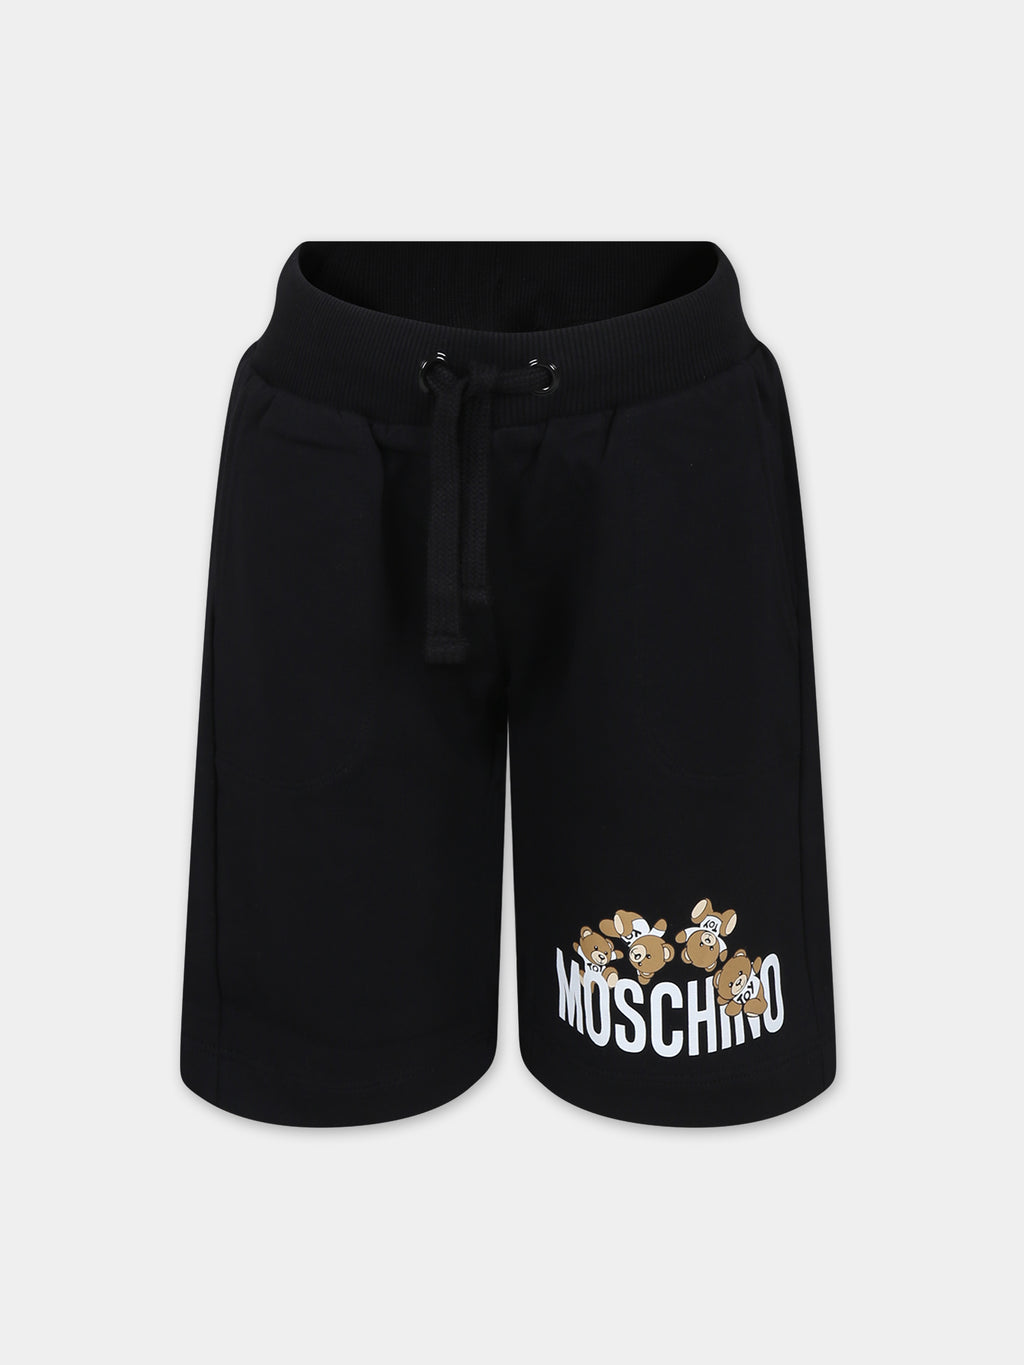 Black shorts for kids with Teddy Bears and logo